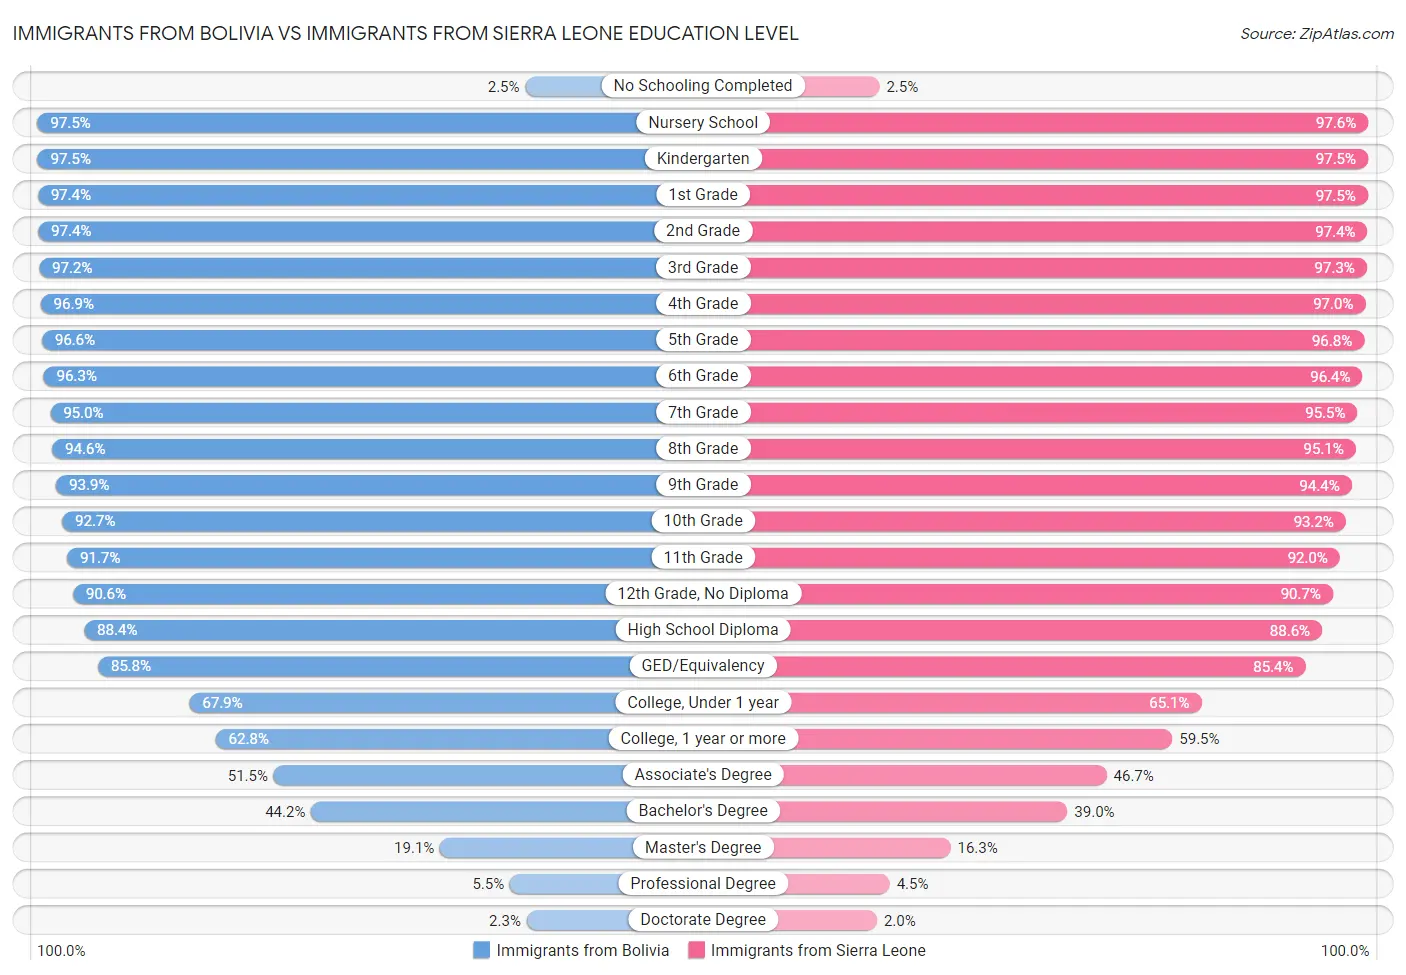 Immigrants from Bolivia vs Immigrants from Sierra Leone Education Level